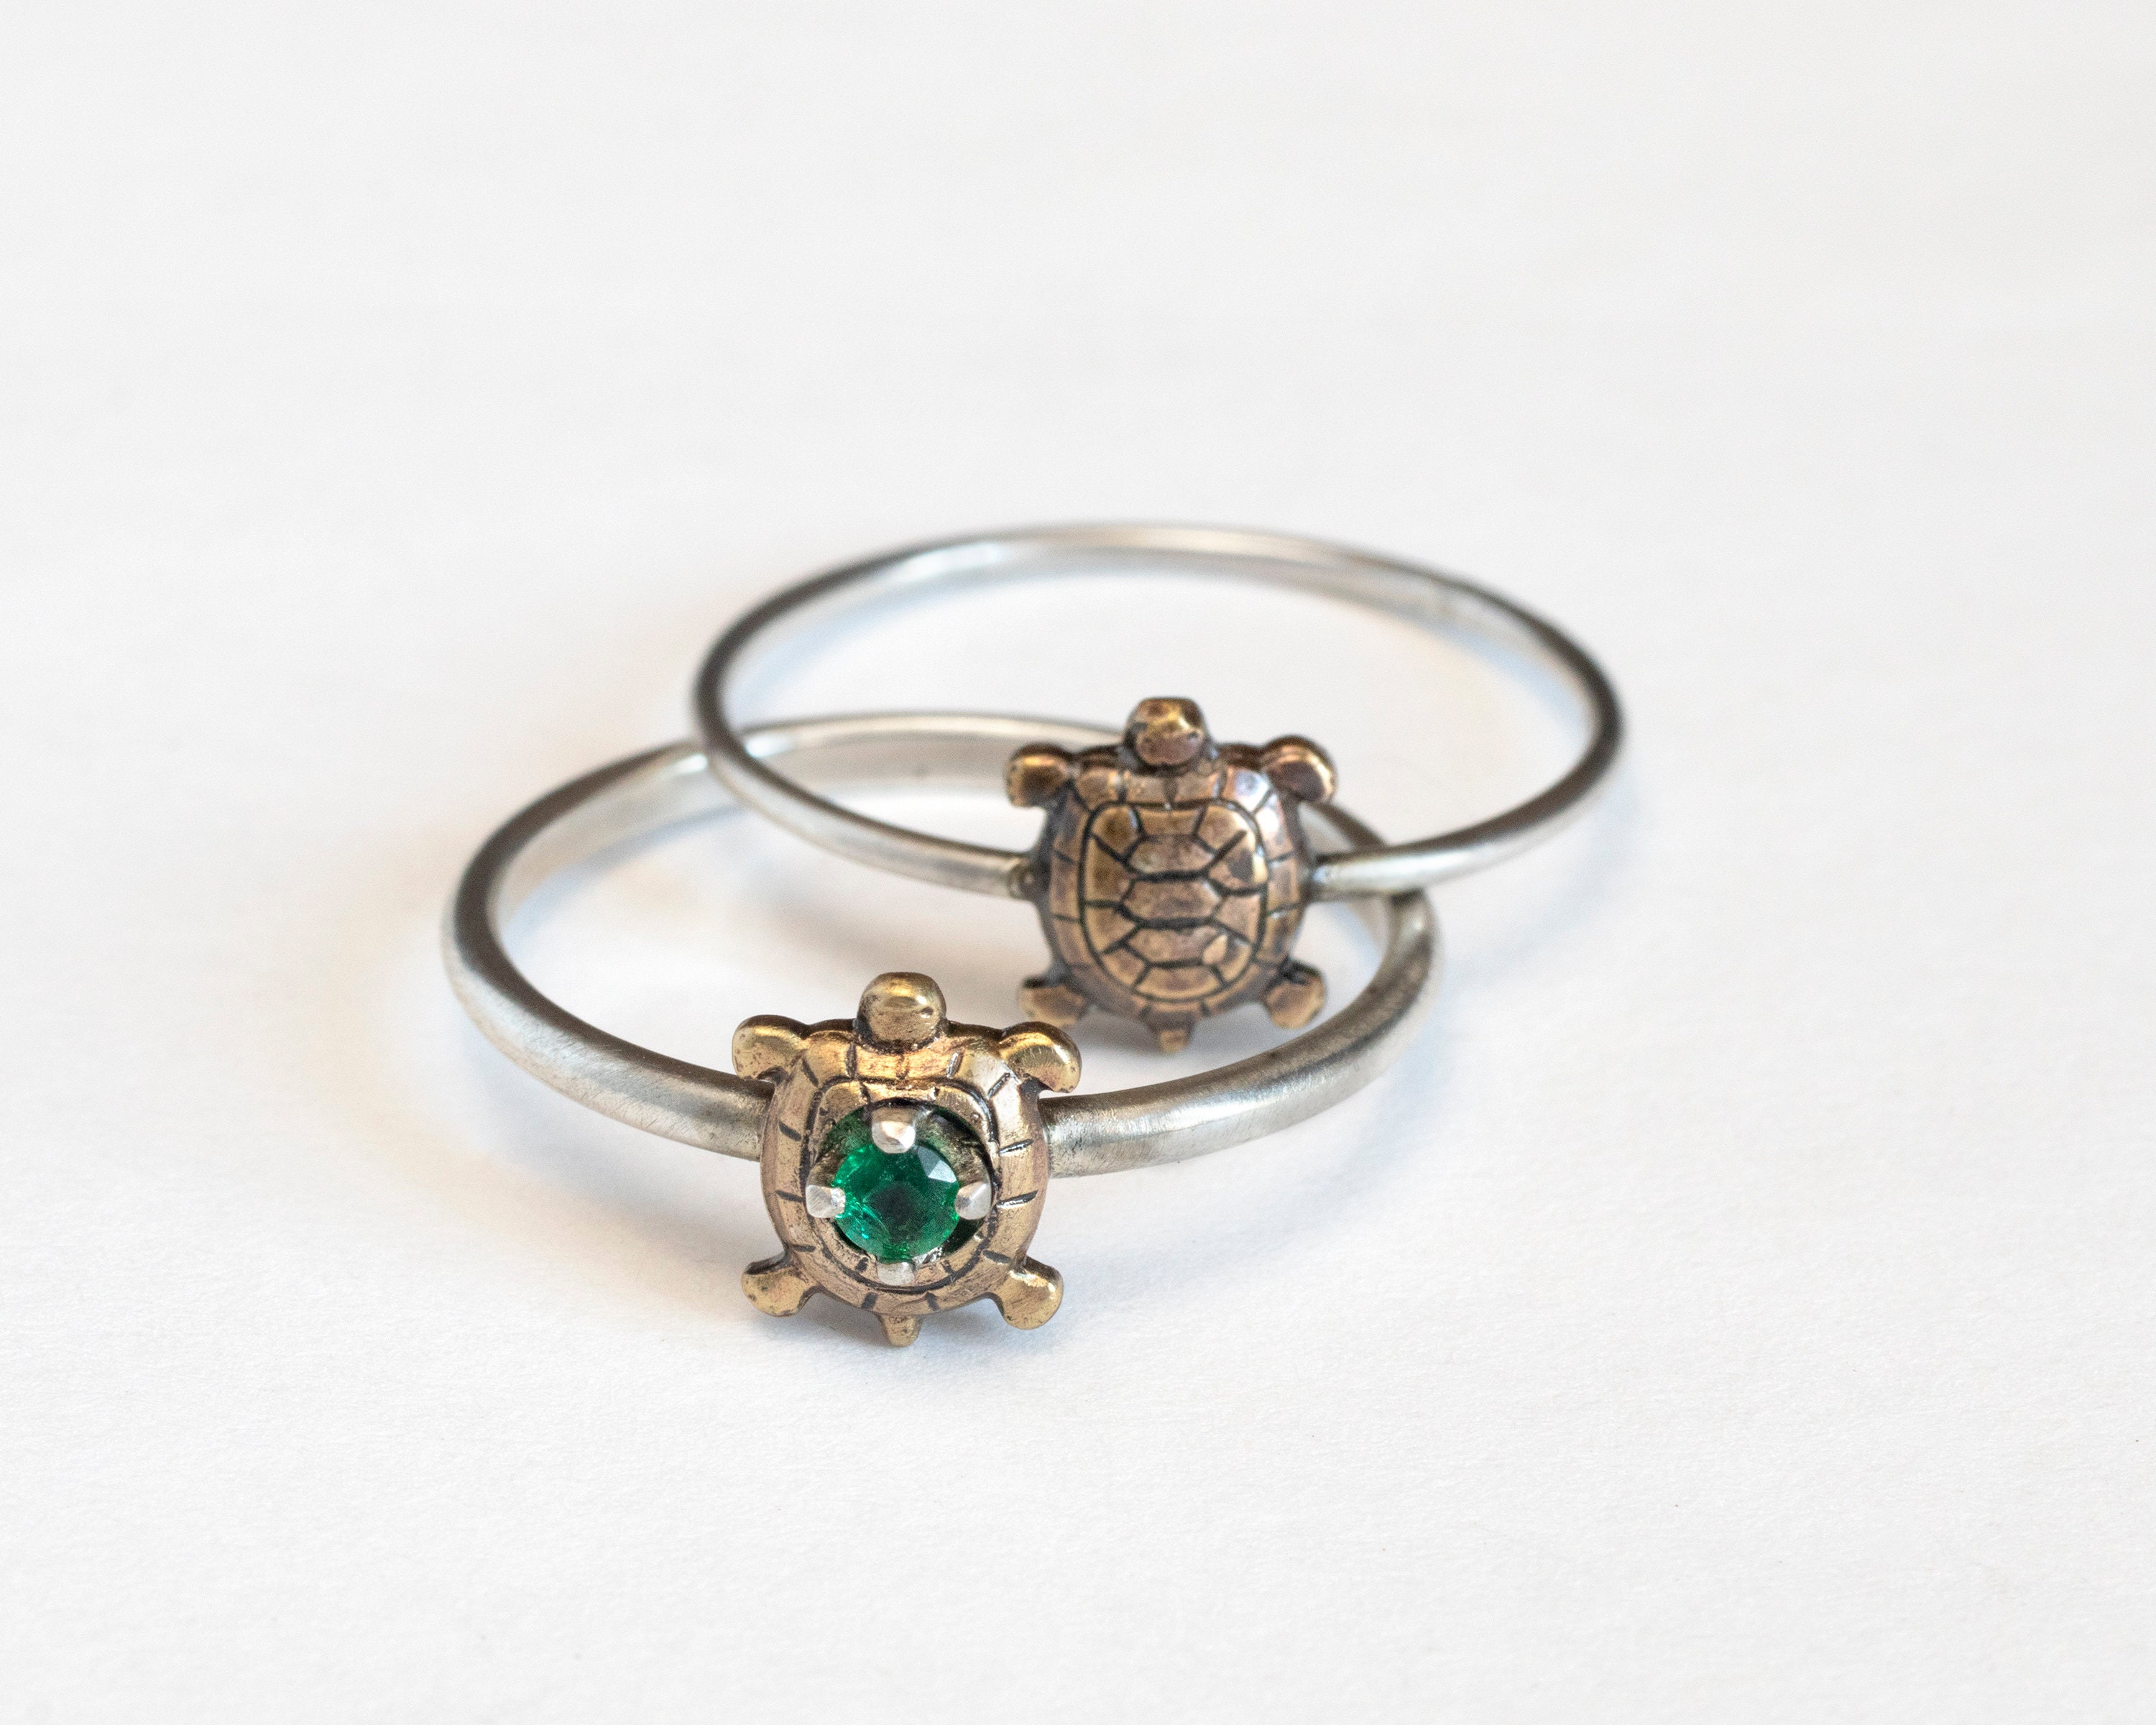 Can we wear the tortoise ring in gold instead of silver? - Quora